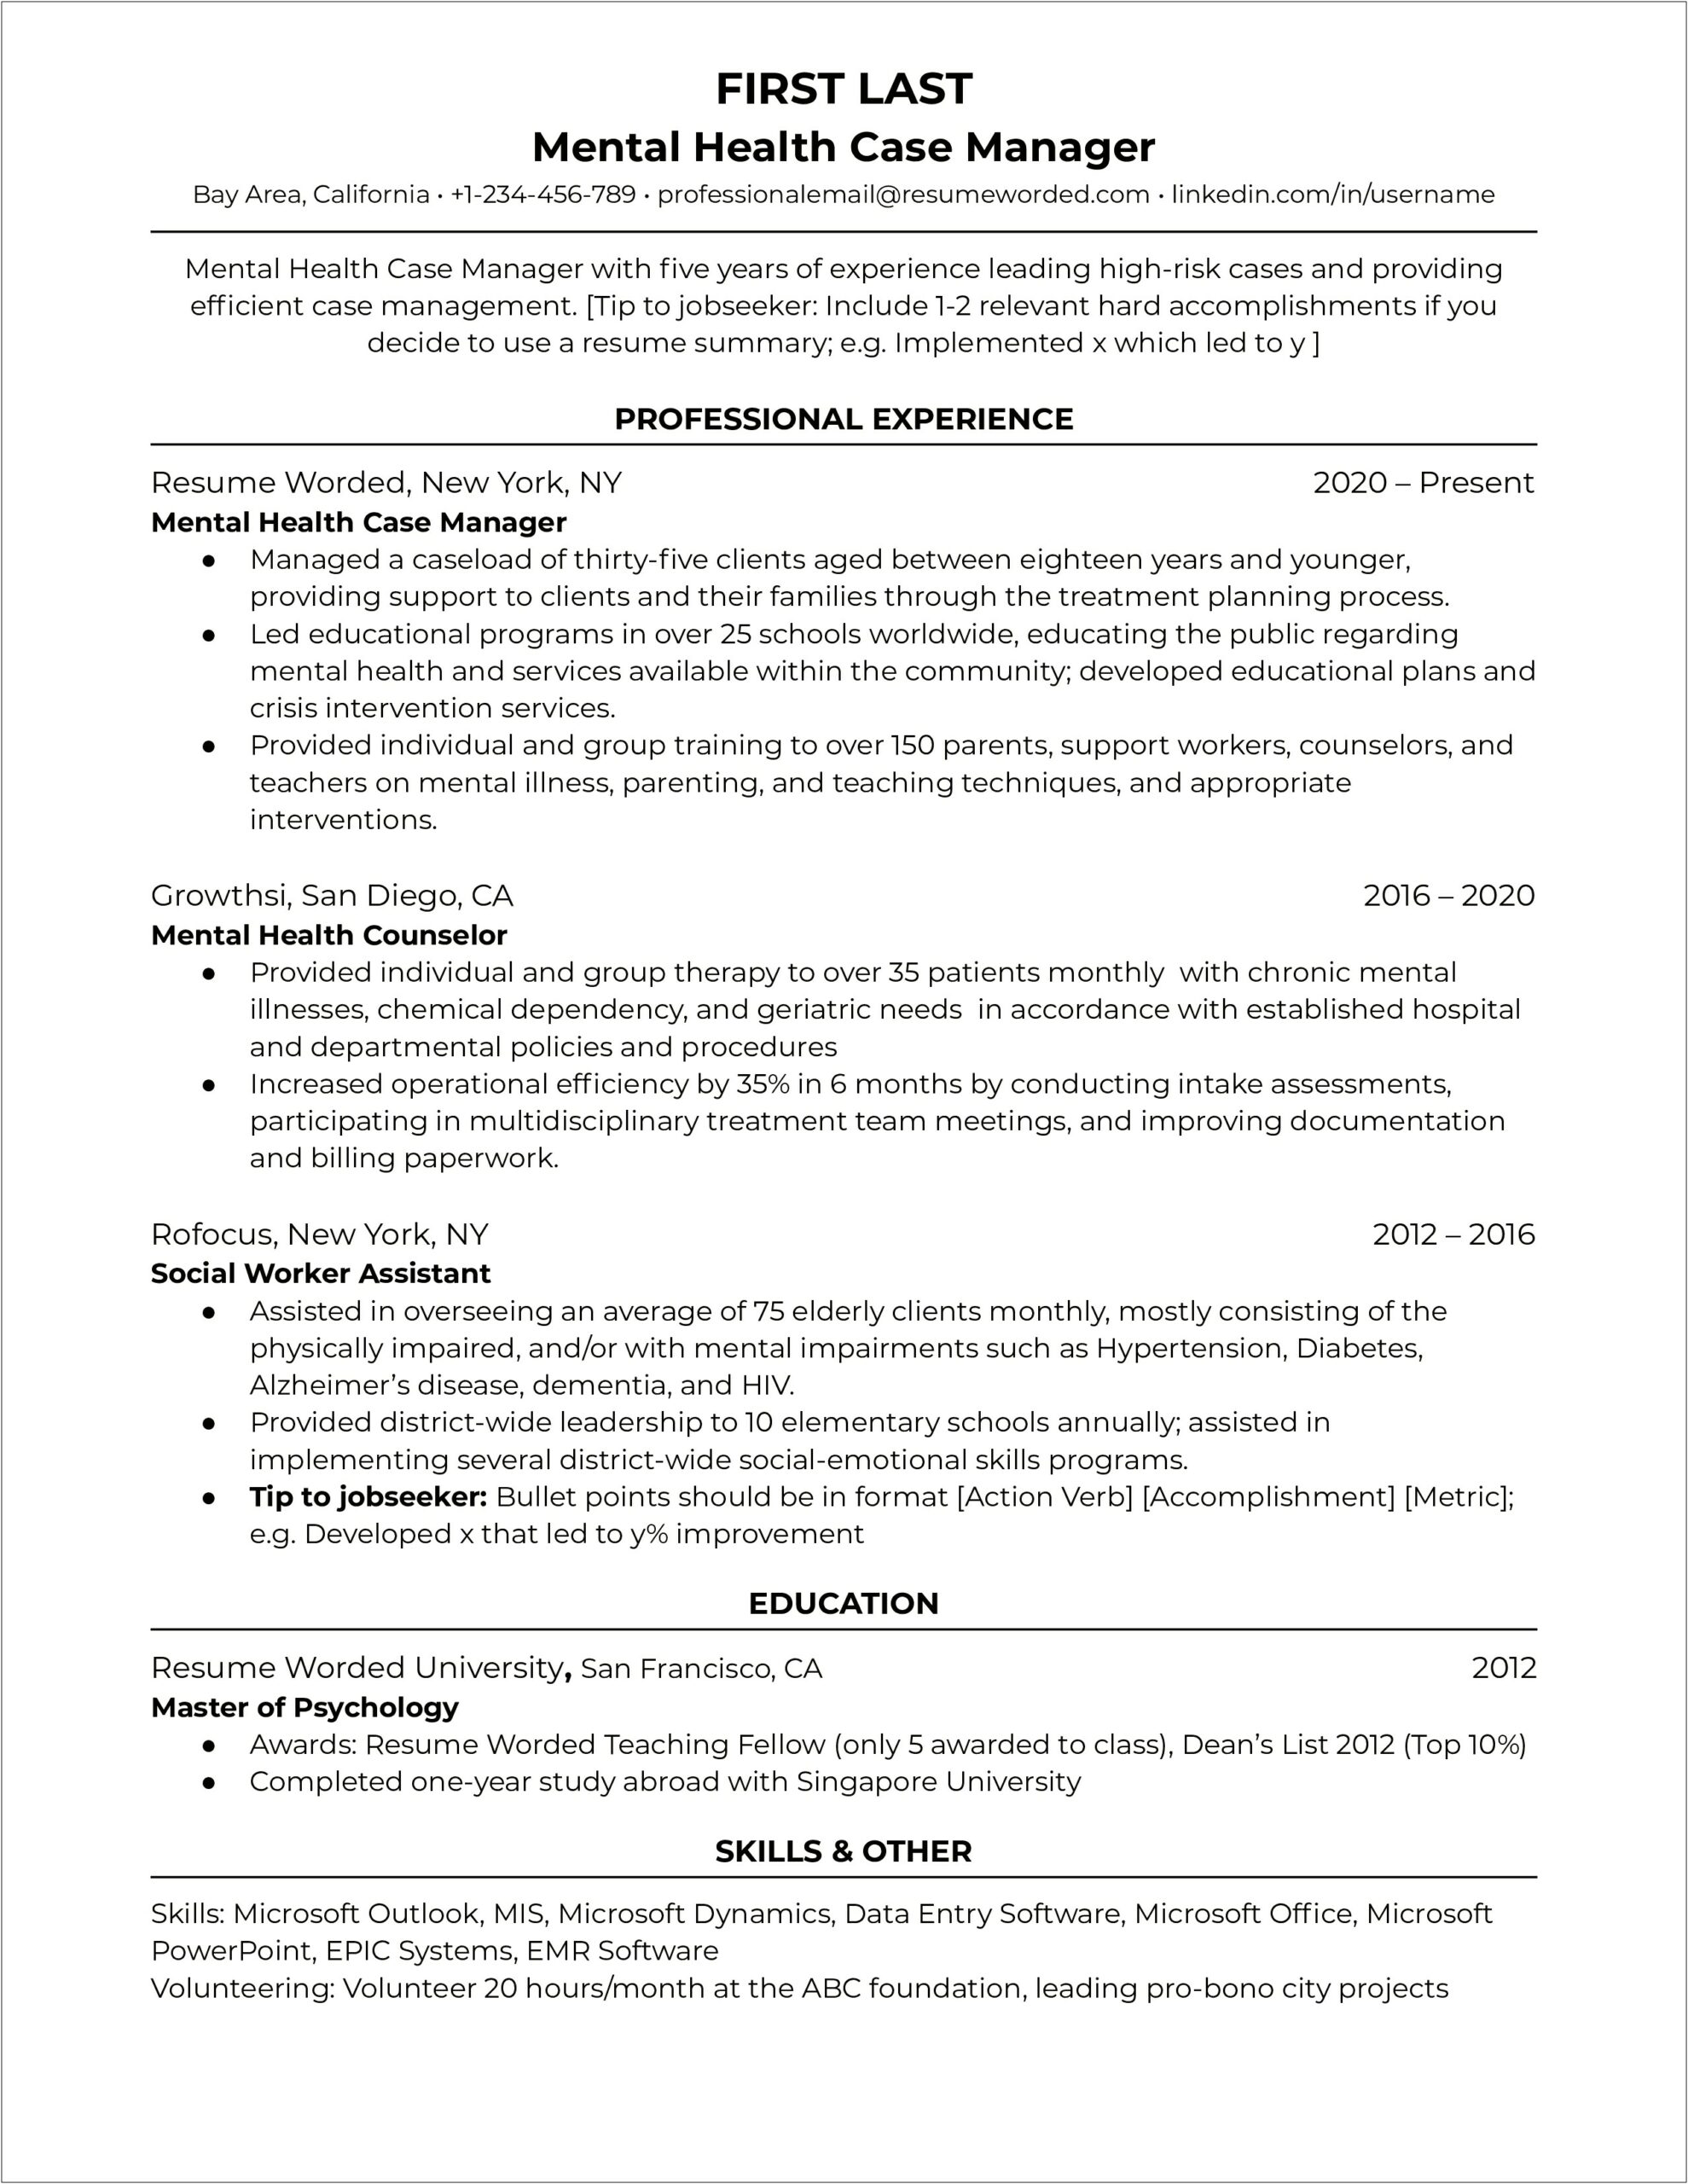 Resume Of A Hospital Case Manager